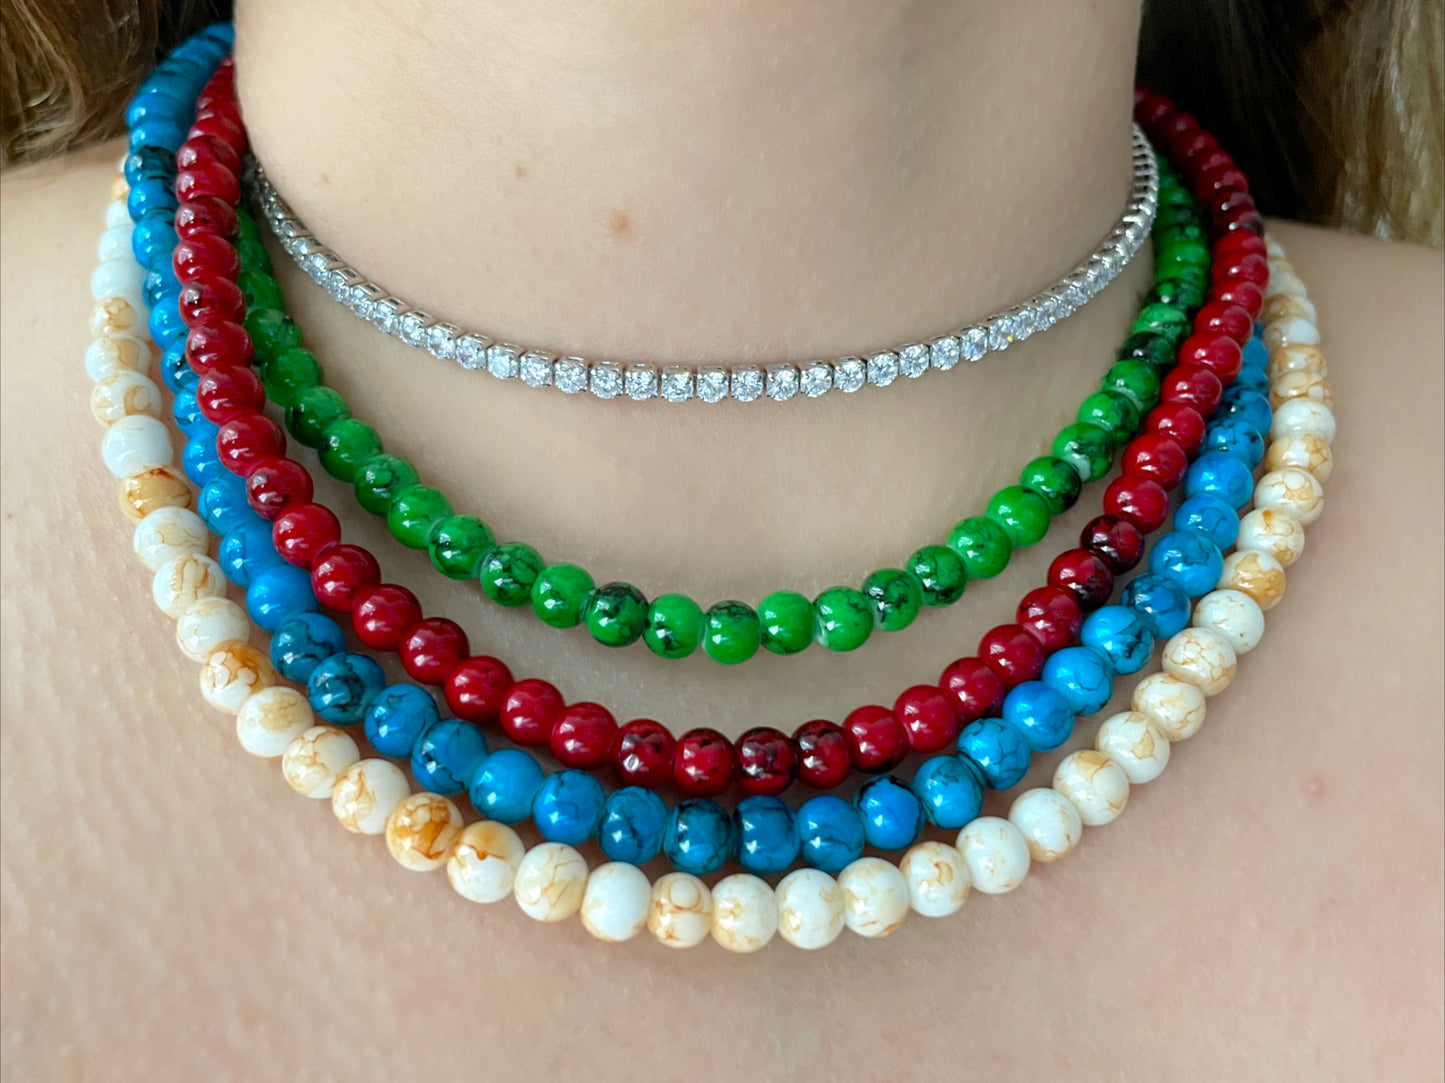 Solid color glass beaded necklaces